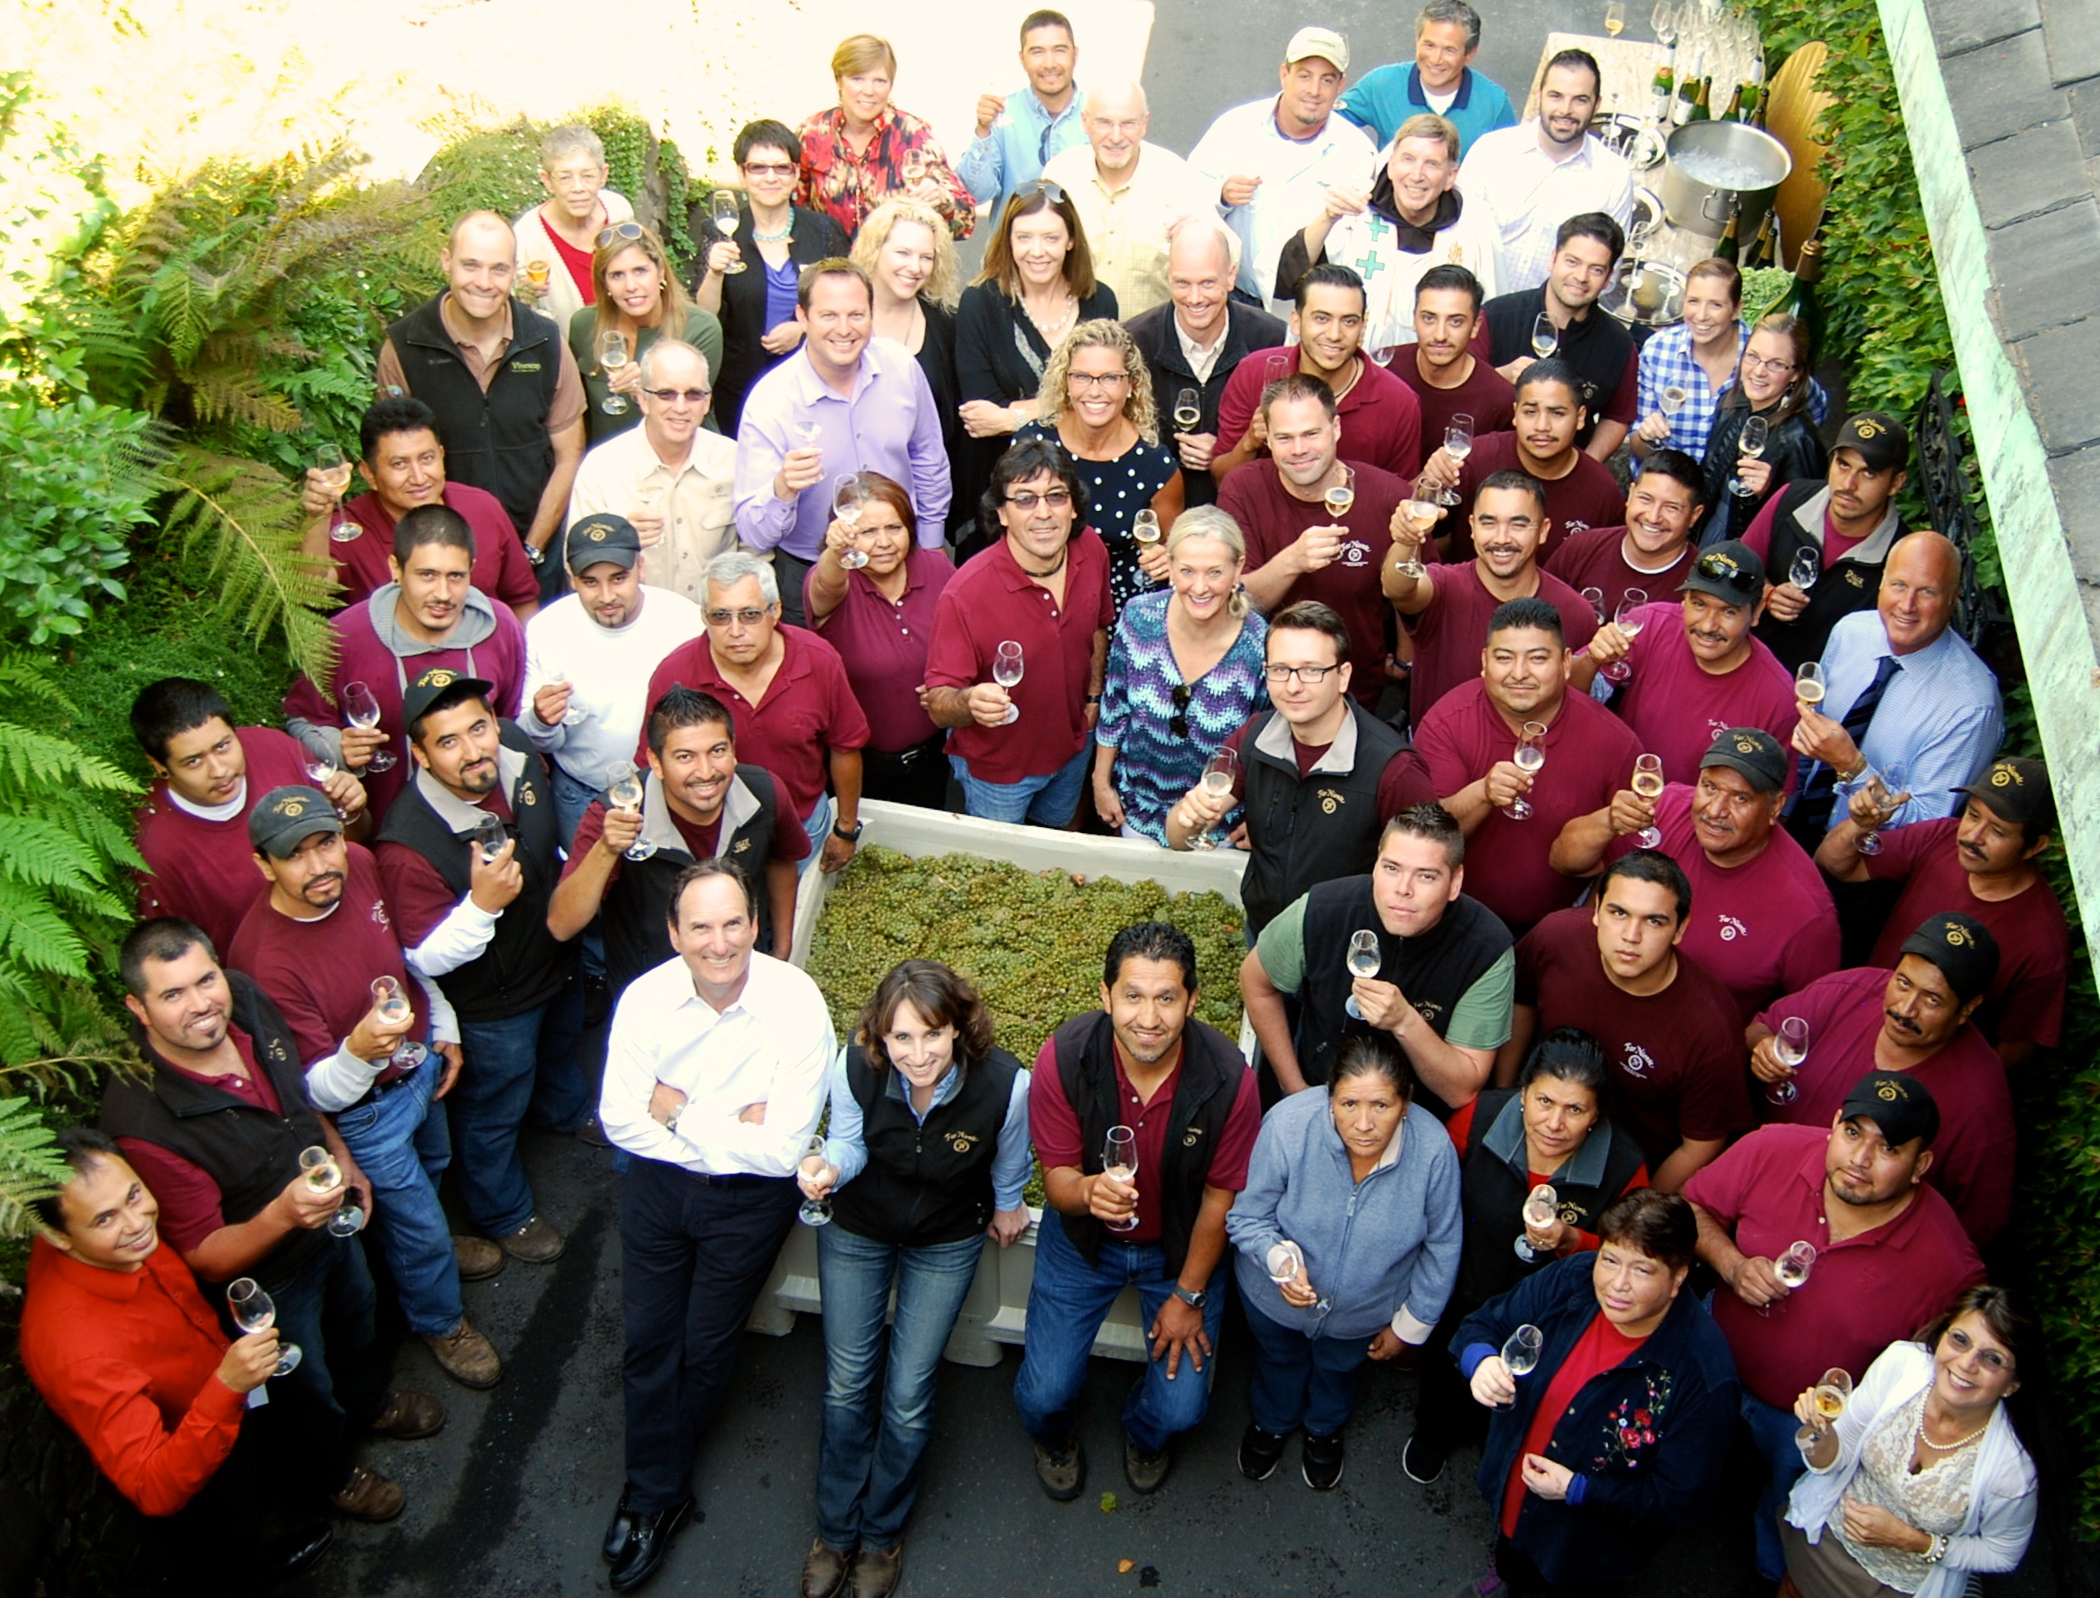 The Completion of Far Niente's 2014 Harvest!